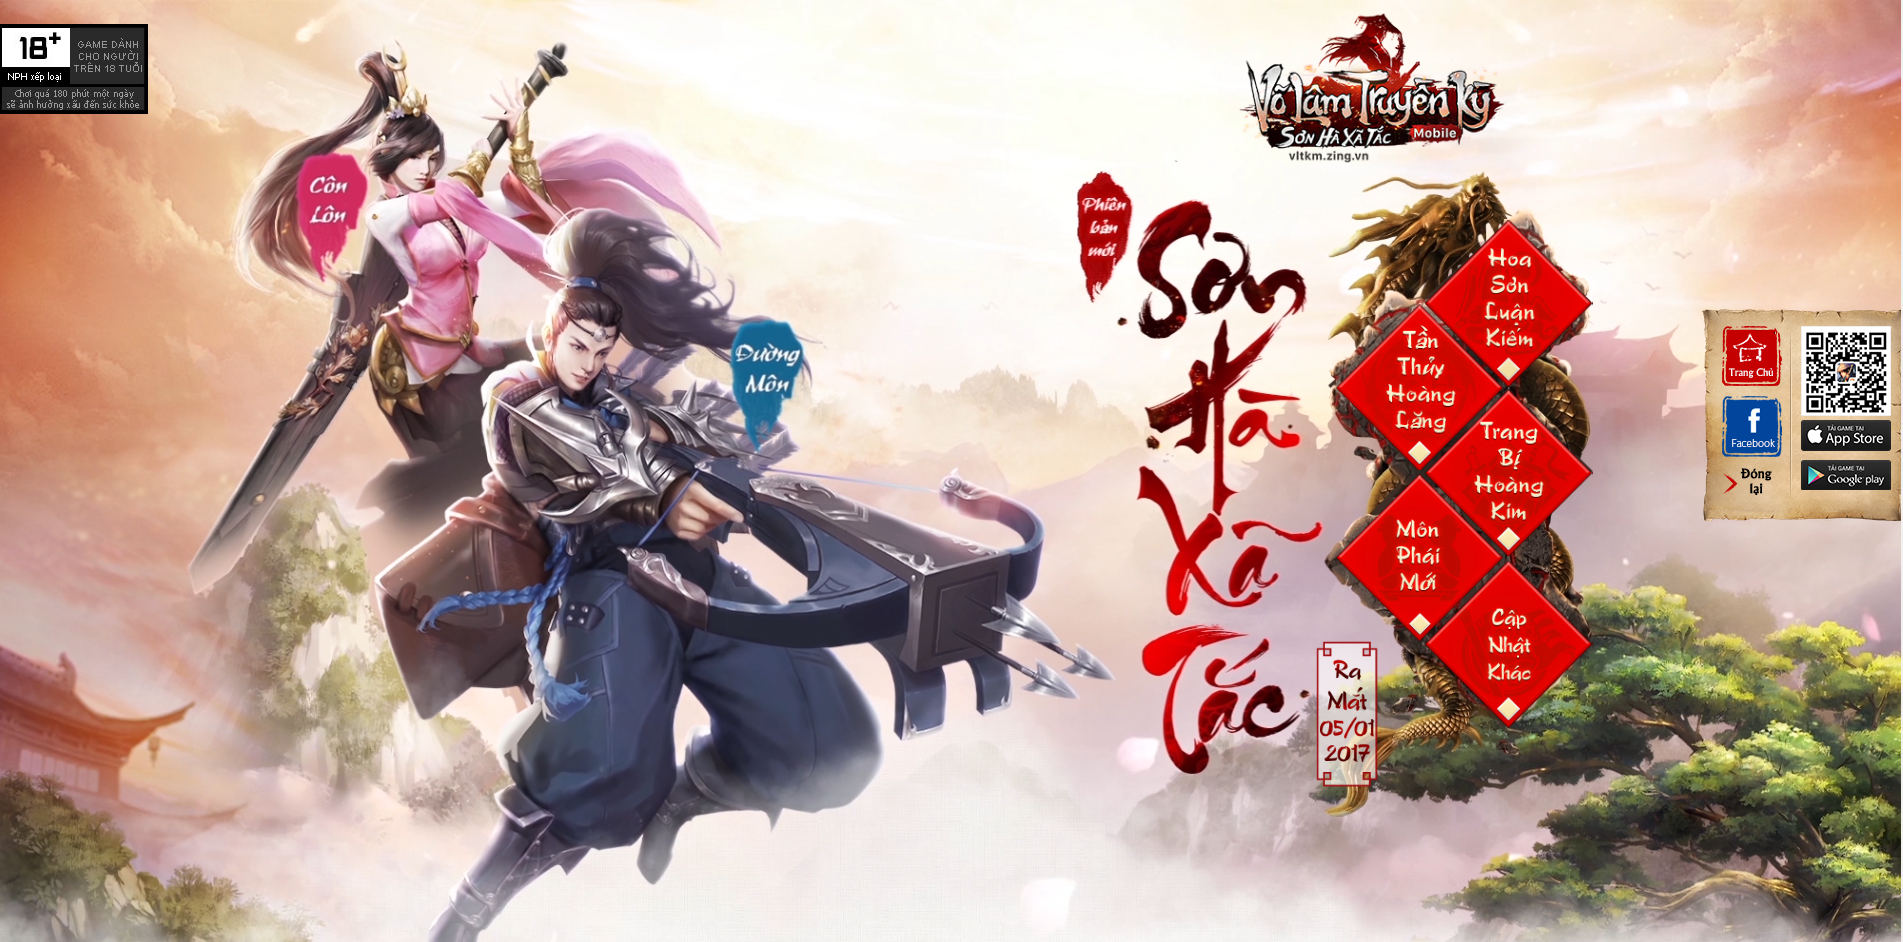 2game-vo-lam-truyen-ky-mobile-son-ha-xa-tac-anh-1sx.png (1903×942)